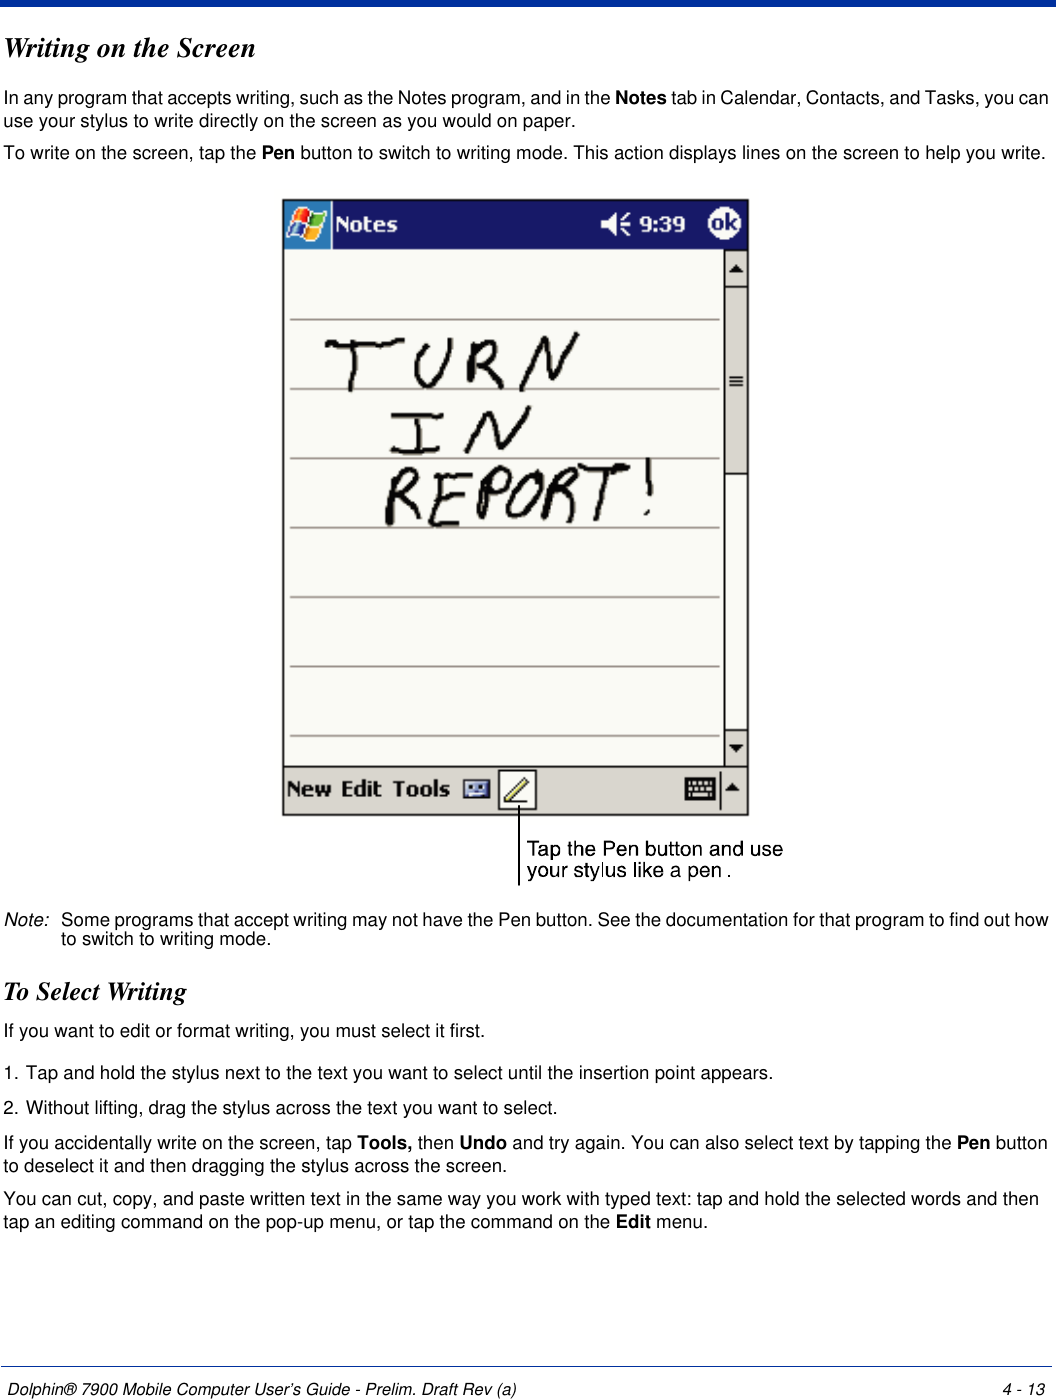 Dolphin® 7900 Mobile Computer User’s Guide - Prelim. Draft Rev (a) 4 - 13Writing on the ScreenIn any program that accepts writing, such as the Notes program, and in the Notes tab in Calendar, Contacts, and Tasks, you can use your stylus to write directly on the screen as you would on paper. To write on the screen, tap the Pen button to switch to writing mode. This action displays lines on the screen to help you write.Note: Some programs that accept writing may not have the Pen button. See the documentation for that program to find out how to switch to writing mode.To Select WritingIf you want to edit or format writing, you must select it first.1. Tap and hold the stylus next to the text you want to select until the insertion point appears.2. Without lifting, drag the stylus across the text you want to select.If you accidentally write on the screen, tap Tools, then Undo and try again. You can also select text by tapping the Pen button to deselect it and then dragging the stylus across the screen.You can cut, copy, and paste written text in the same way you work with typed text: tap and hold the selected words and then tap an editing command on the pop-up menu, or tap the command on the Edit menu.